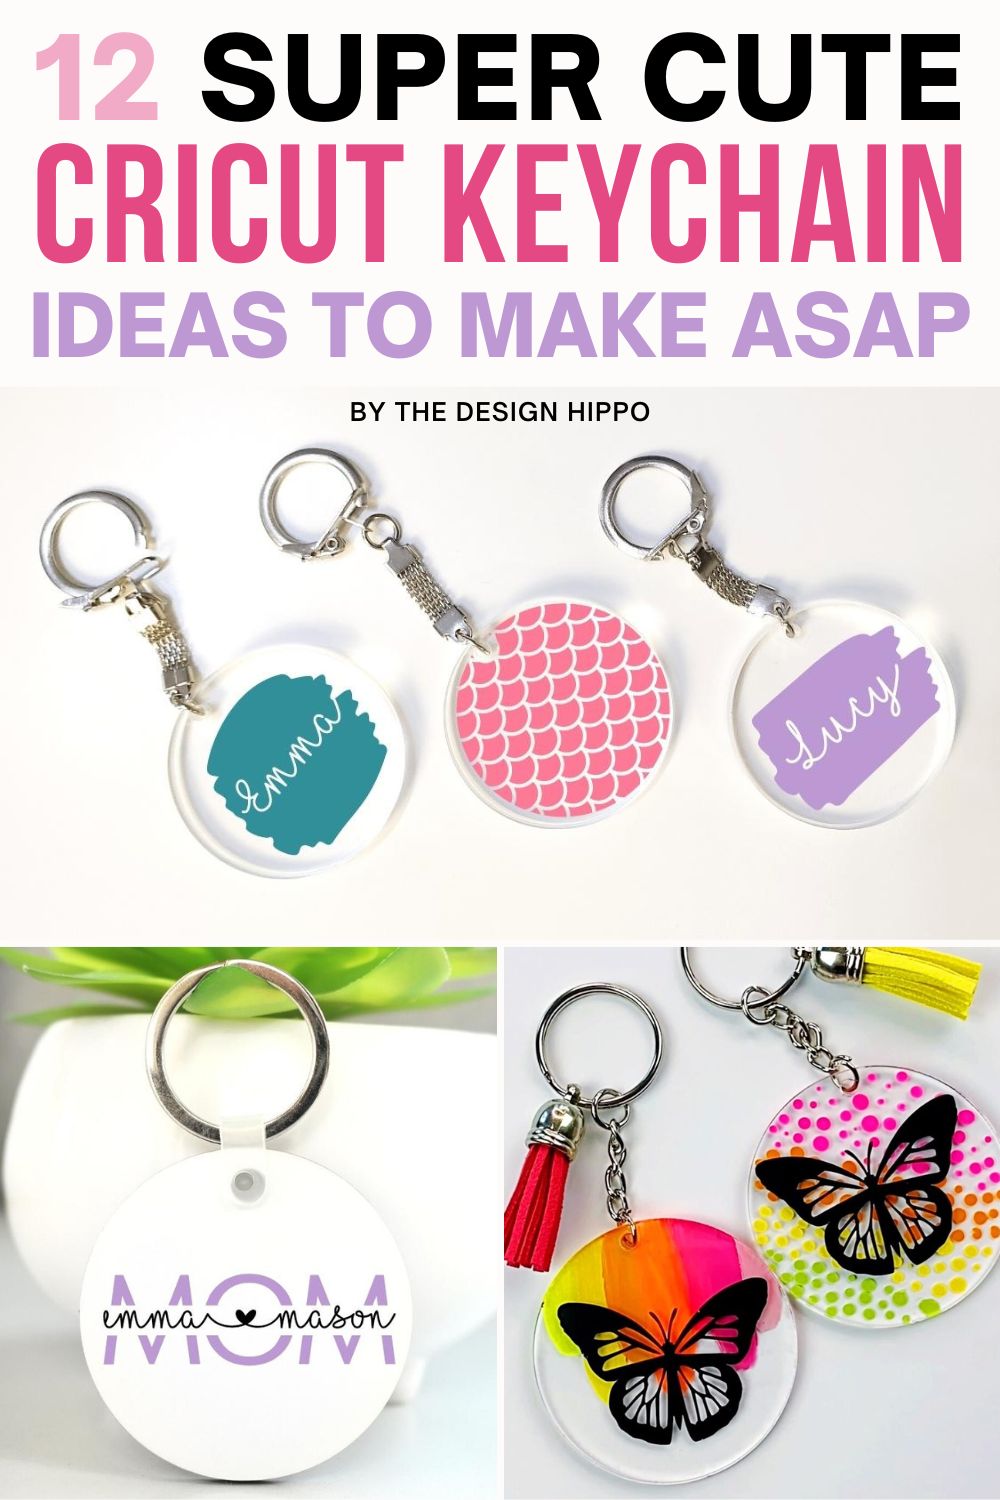 collage of Cricut keychain projects with the text "12 super cute Cricut keychain ideas to make asap"